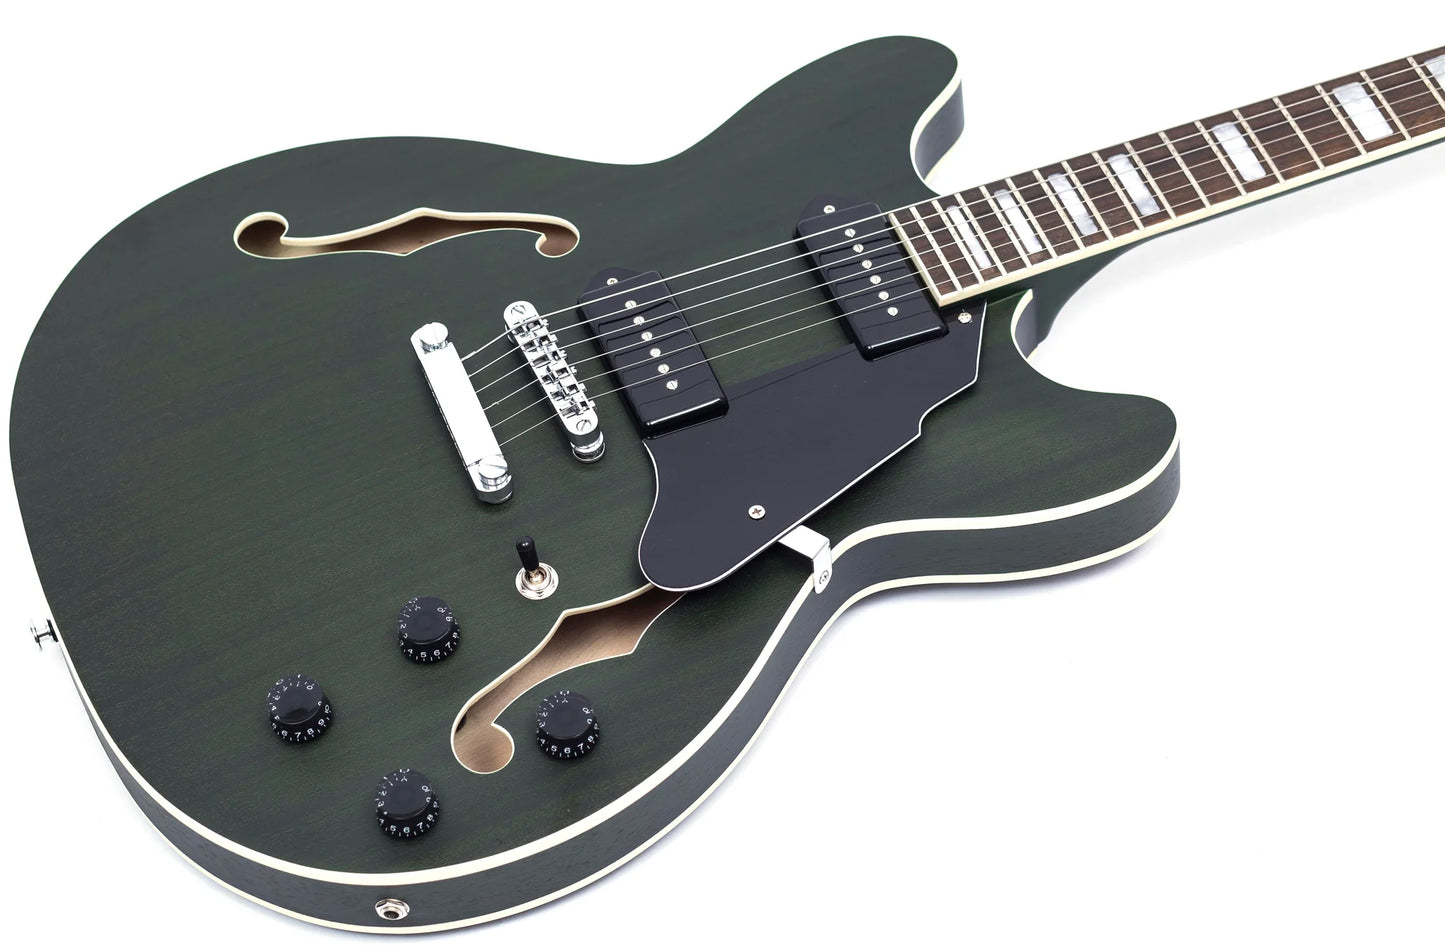 GROTE ELECTRIC GUITAR SEMI-HOLLOW BODY GUITAR MATTE FINISHED P90 PICKUPS (GREEN)